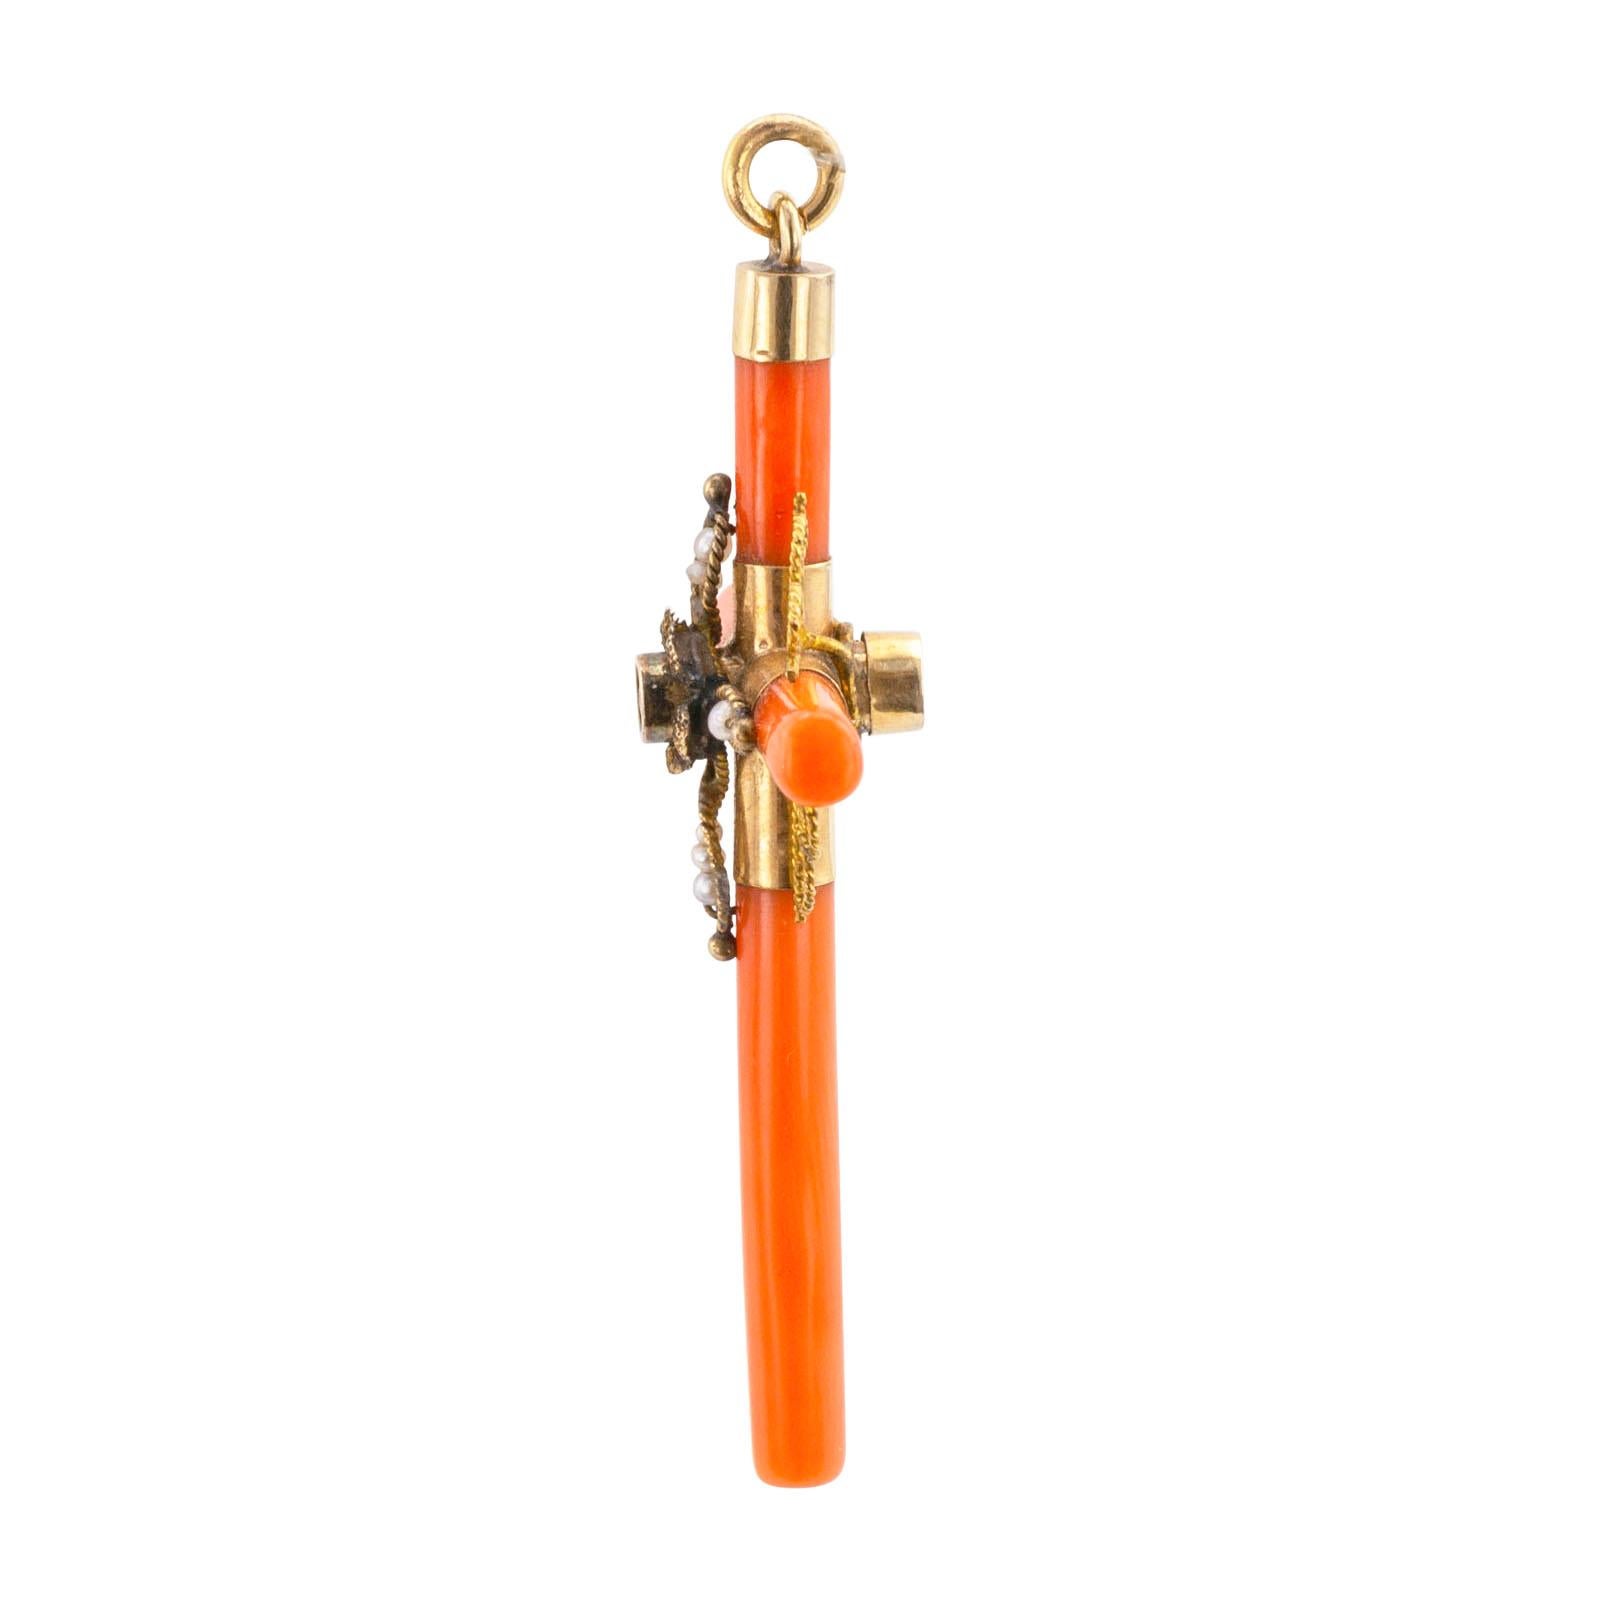 Stanhope* lens coral seed pearl and gold Victorian cross pendant.

DETAILS:
Victorian coral seed pearl gold and Stanhope* lens cross pendant circa 1890.

*Stanhope scopes are optical devices that enable the viewing of microphotographs without using